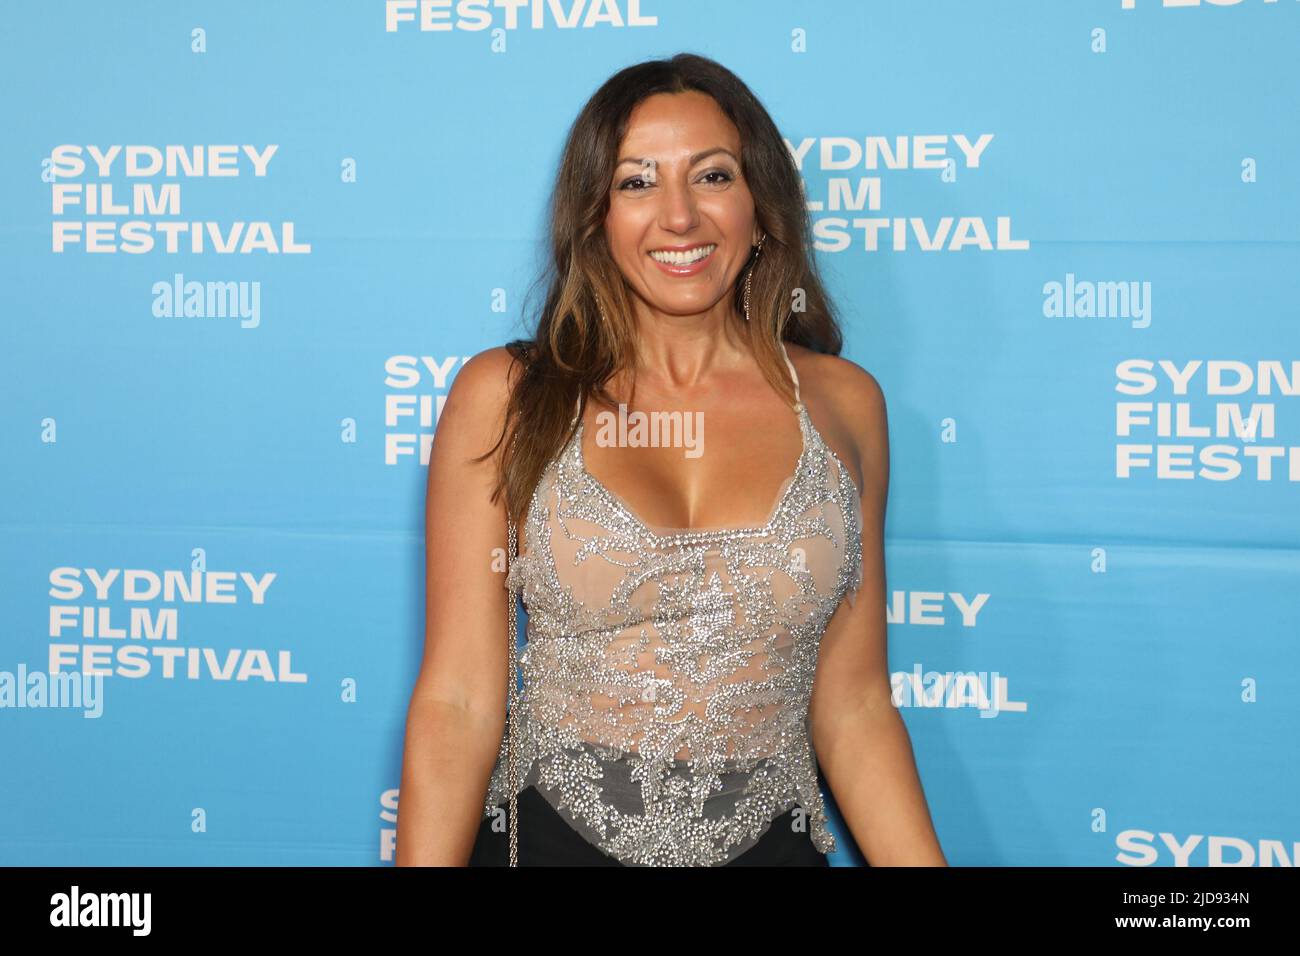 Sydney, Australia. 19th June 2022. Andi Lew arrives on the red carpet for  the Sydney Film Festival closing night gala at the State Theatre, 49 Market  Street. Credit: Richard Milnes/Alamy Live News